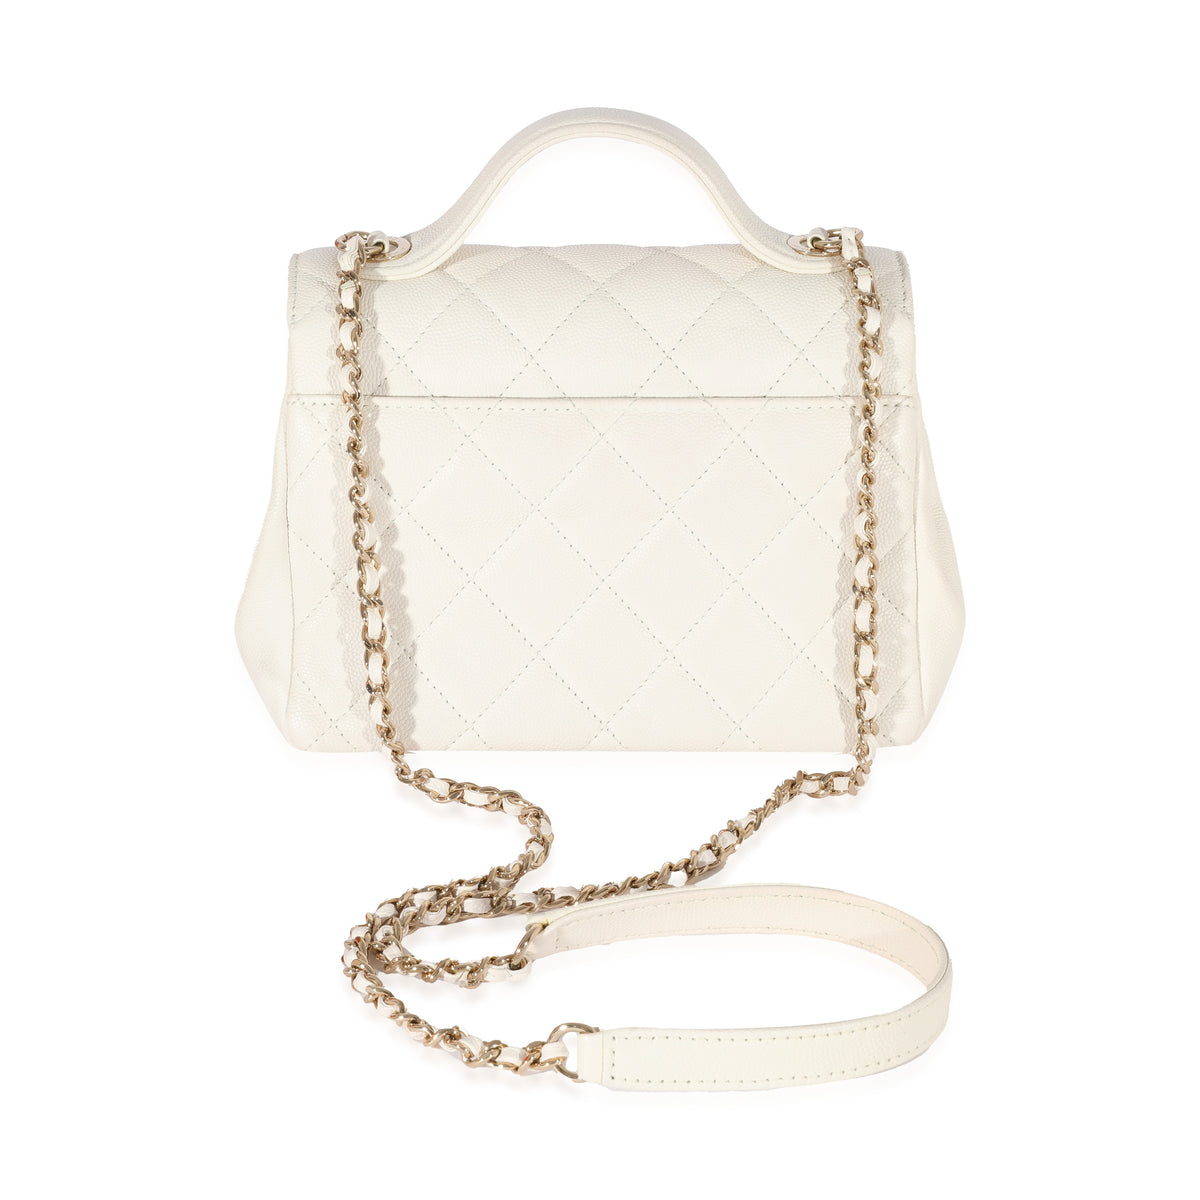 Chanel 2021 Small Business Affinity Flap Bag w/ Tags - White